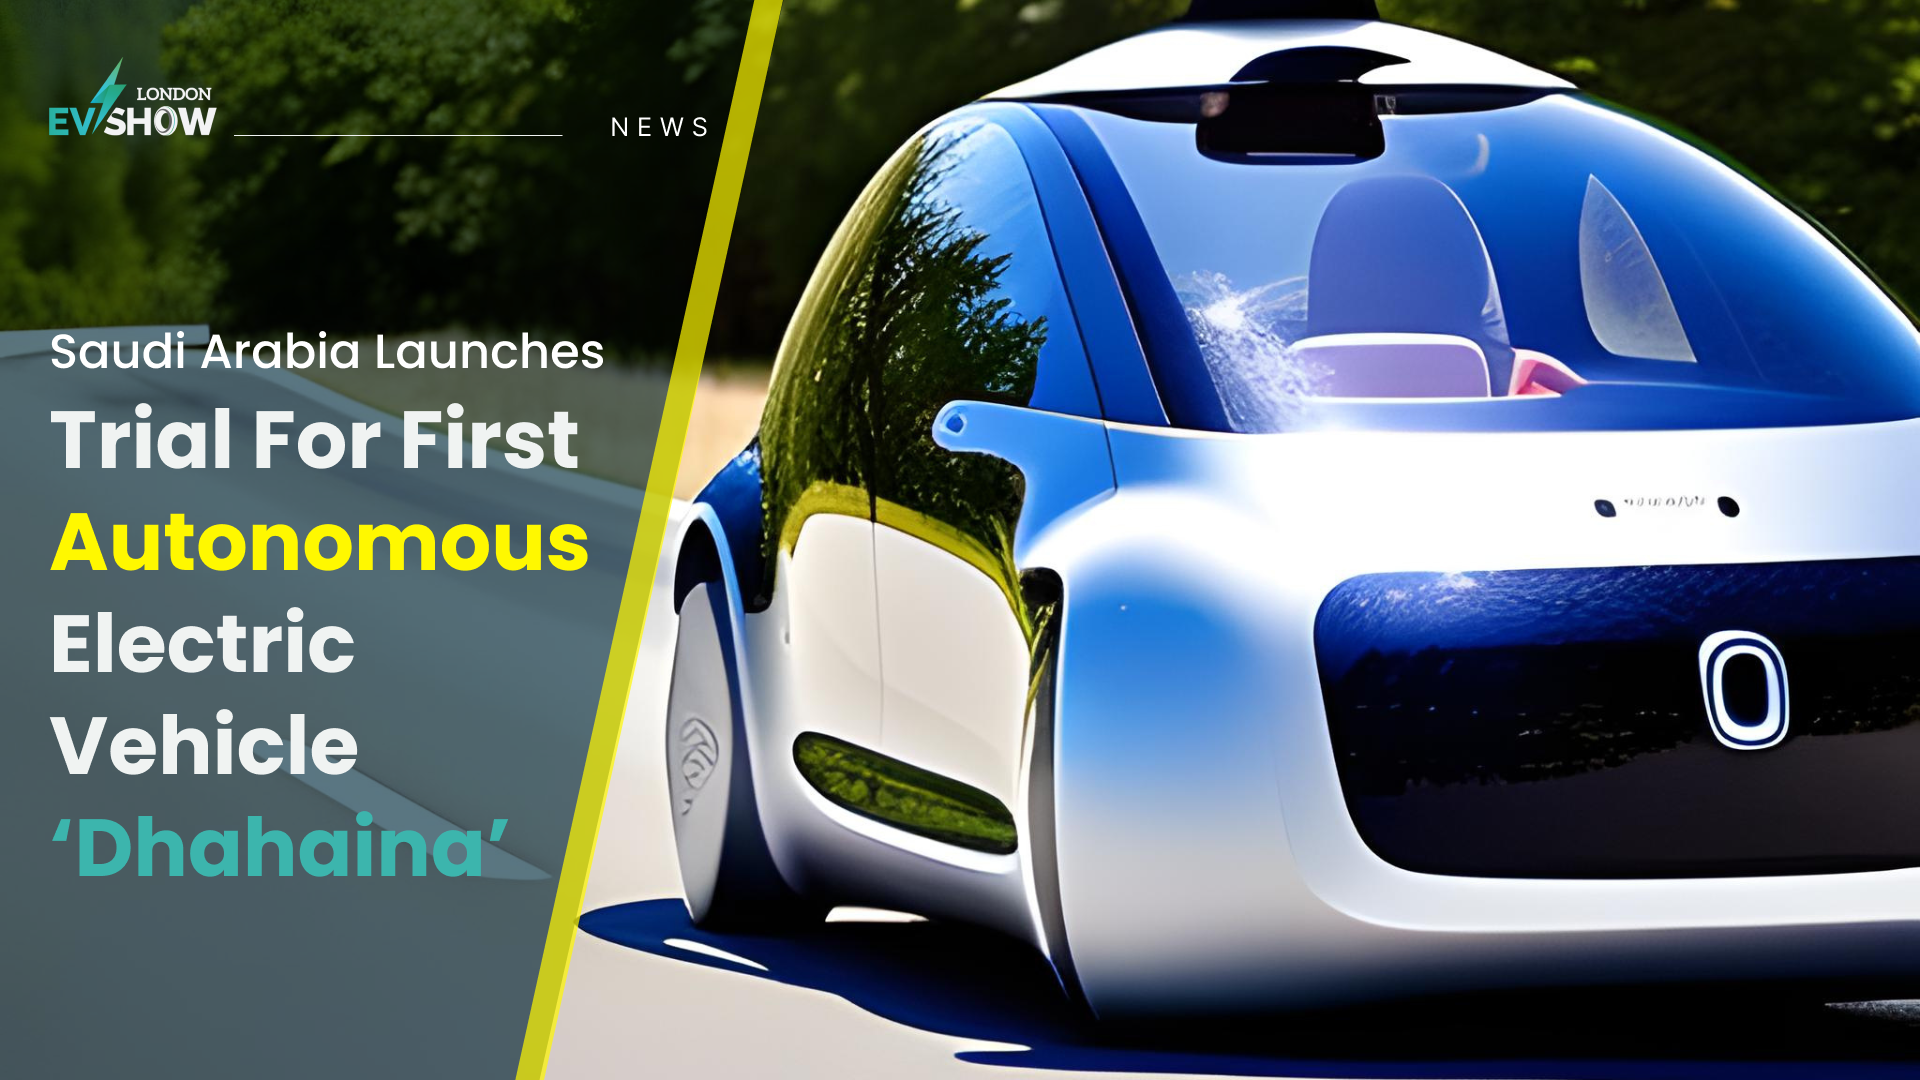 Saudi Arabia Launches Trial For First Autonomous Electric Vehicle ‘Dhahaina’